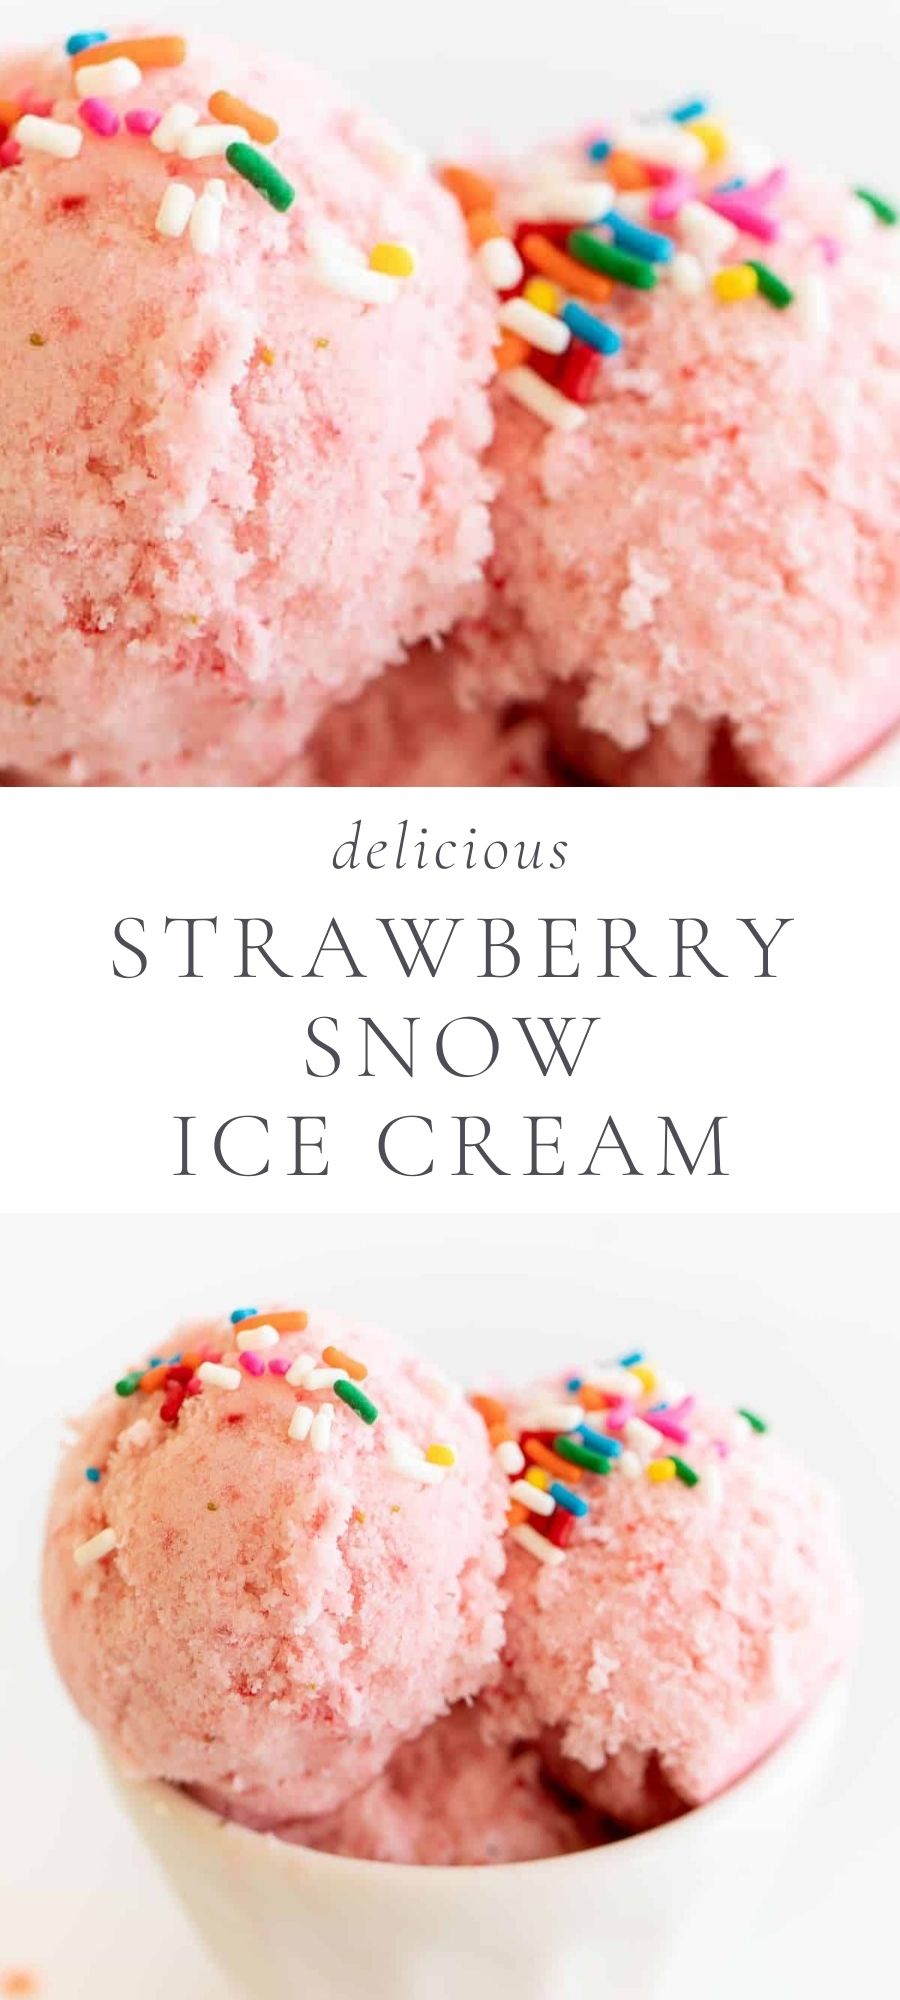 Scoops of strawberry snow ice cream with sprinkles